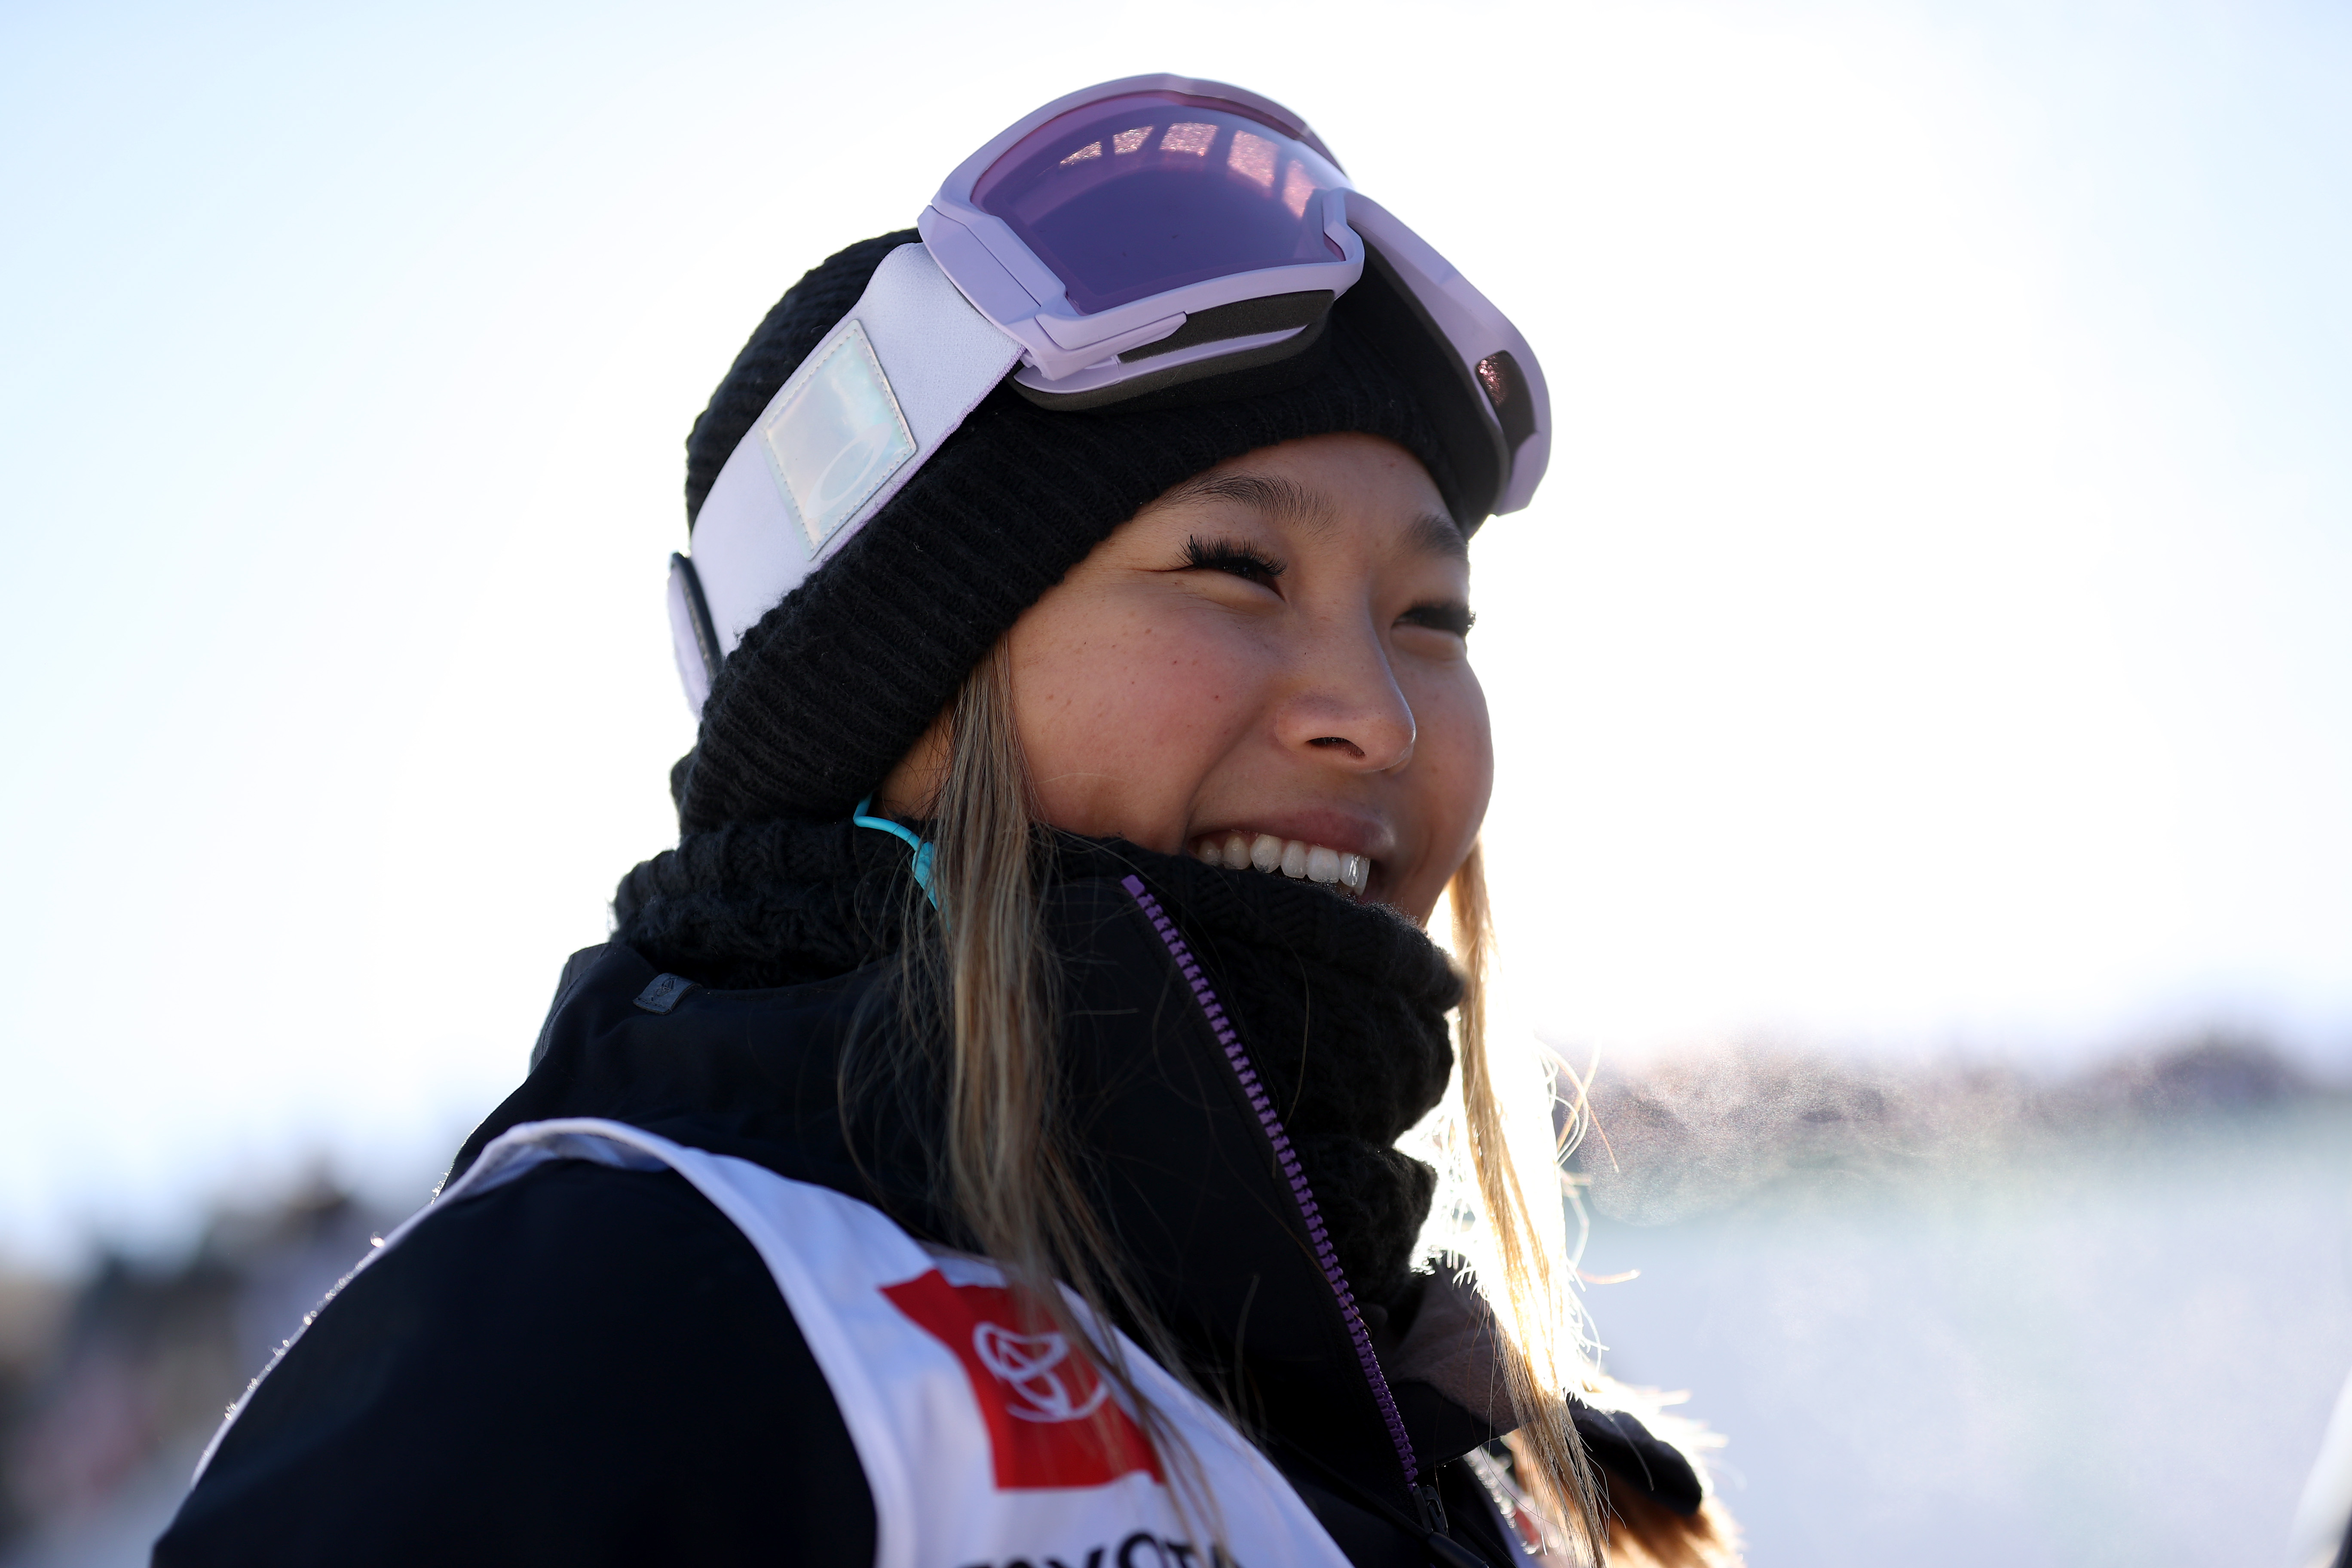 Chloe Kim of Team United States is interviewed after her final run of the women’s snowboard superpipe final during Day 5 of the Dew Tour at Copper Mountain on December 19, 2021 in Copper Mountain, Colorado. Kim won the event on her final run after crashing on her previous two runs.